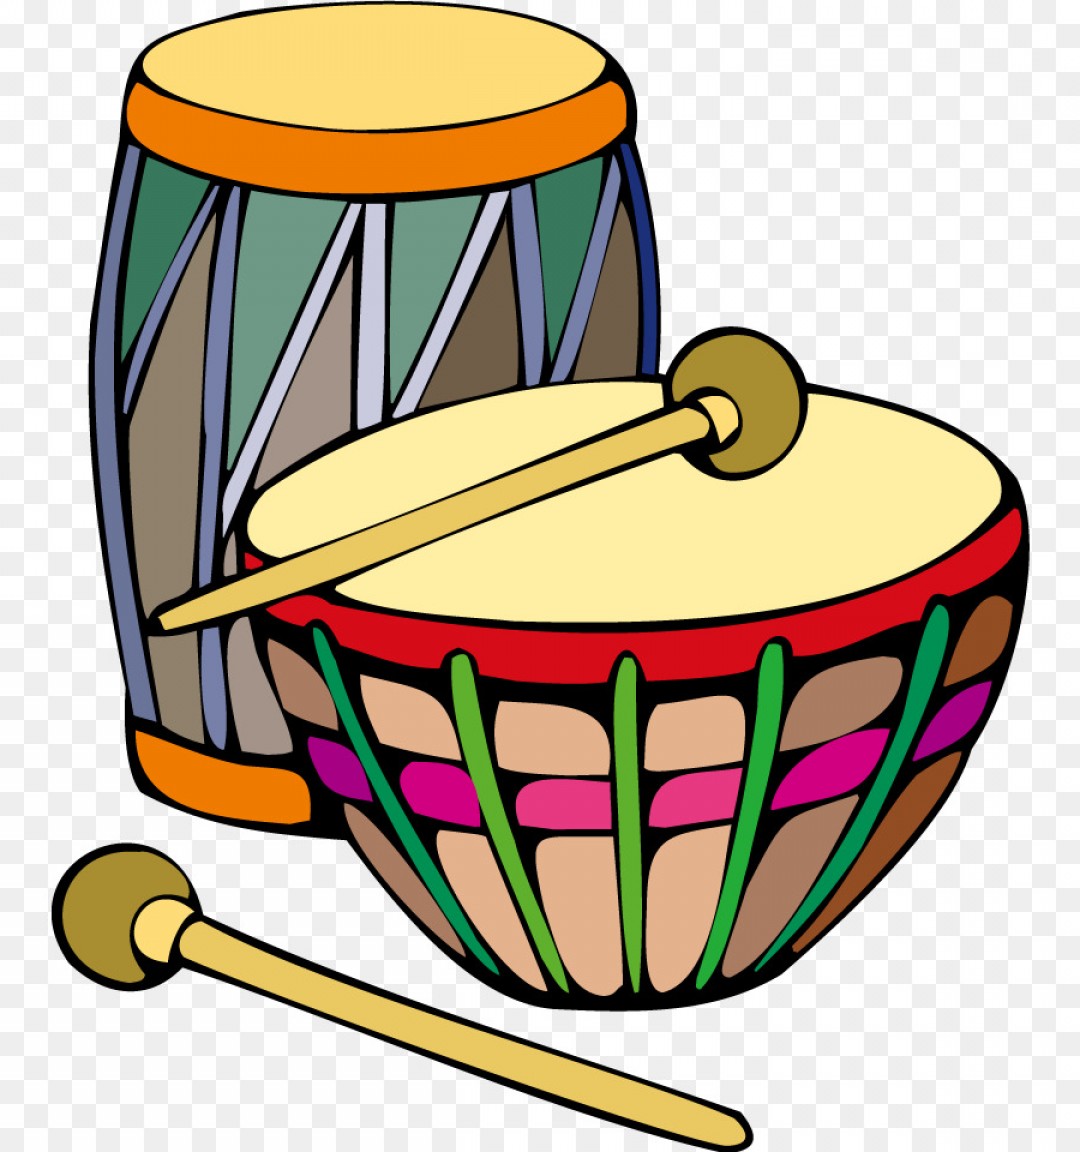 Download Dhol Vector at Vectorified.com | Collection of Dhol Vector ...